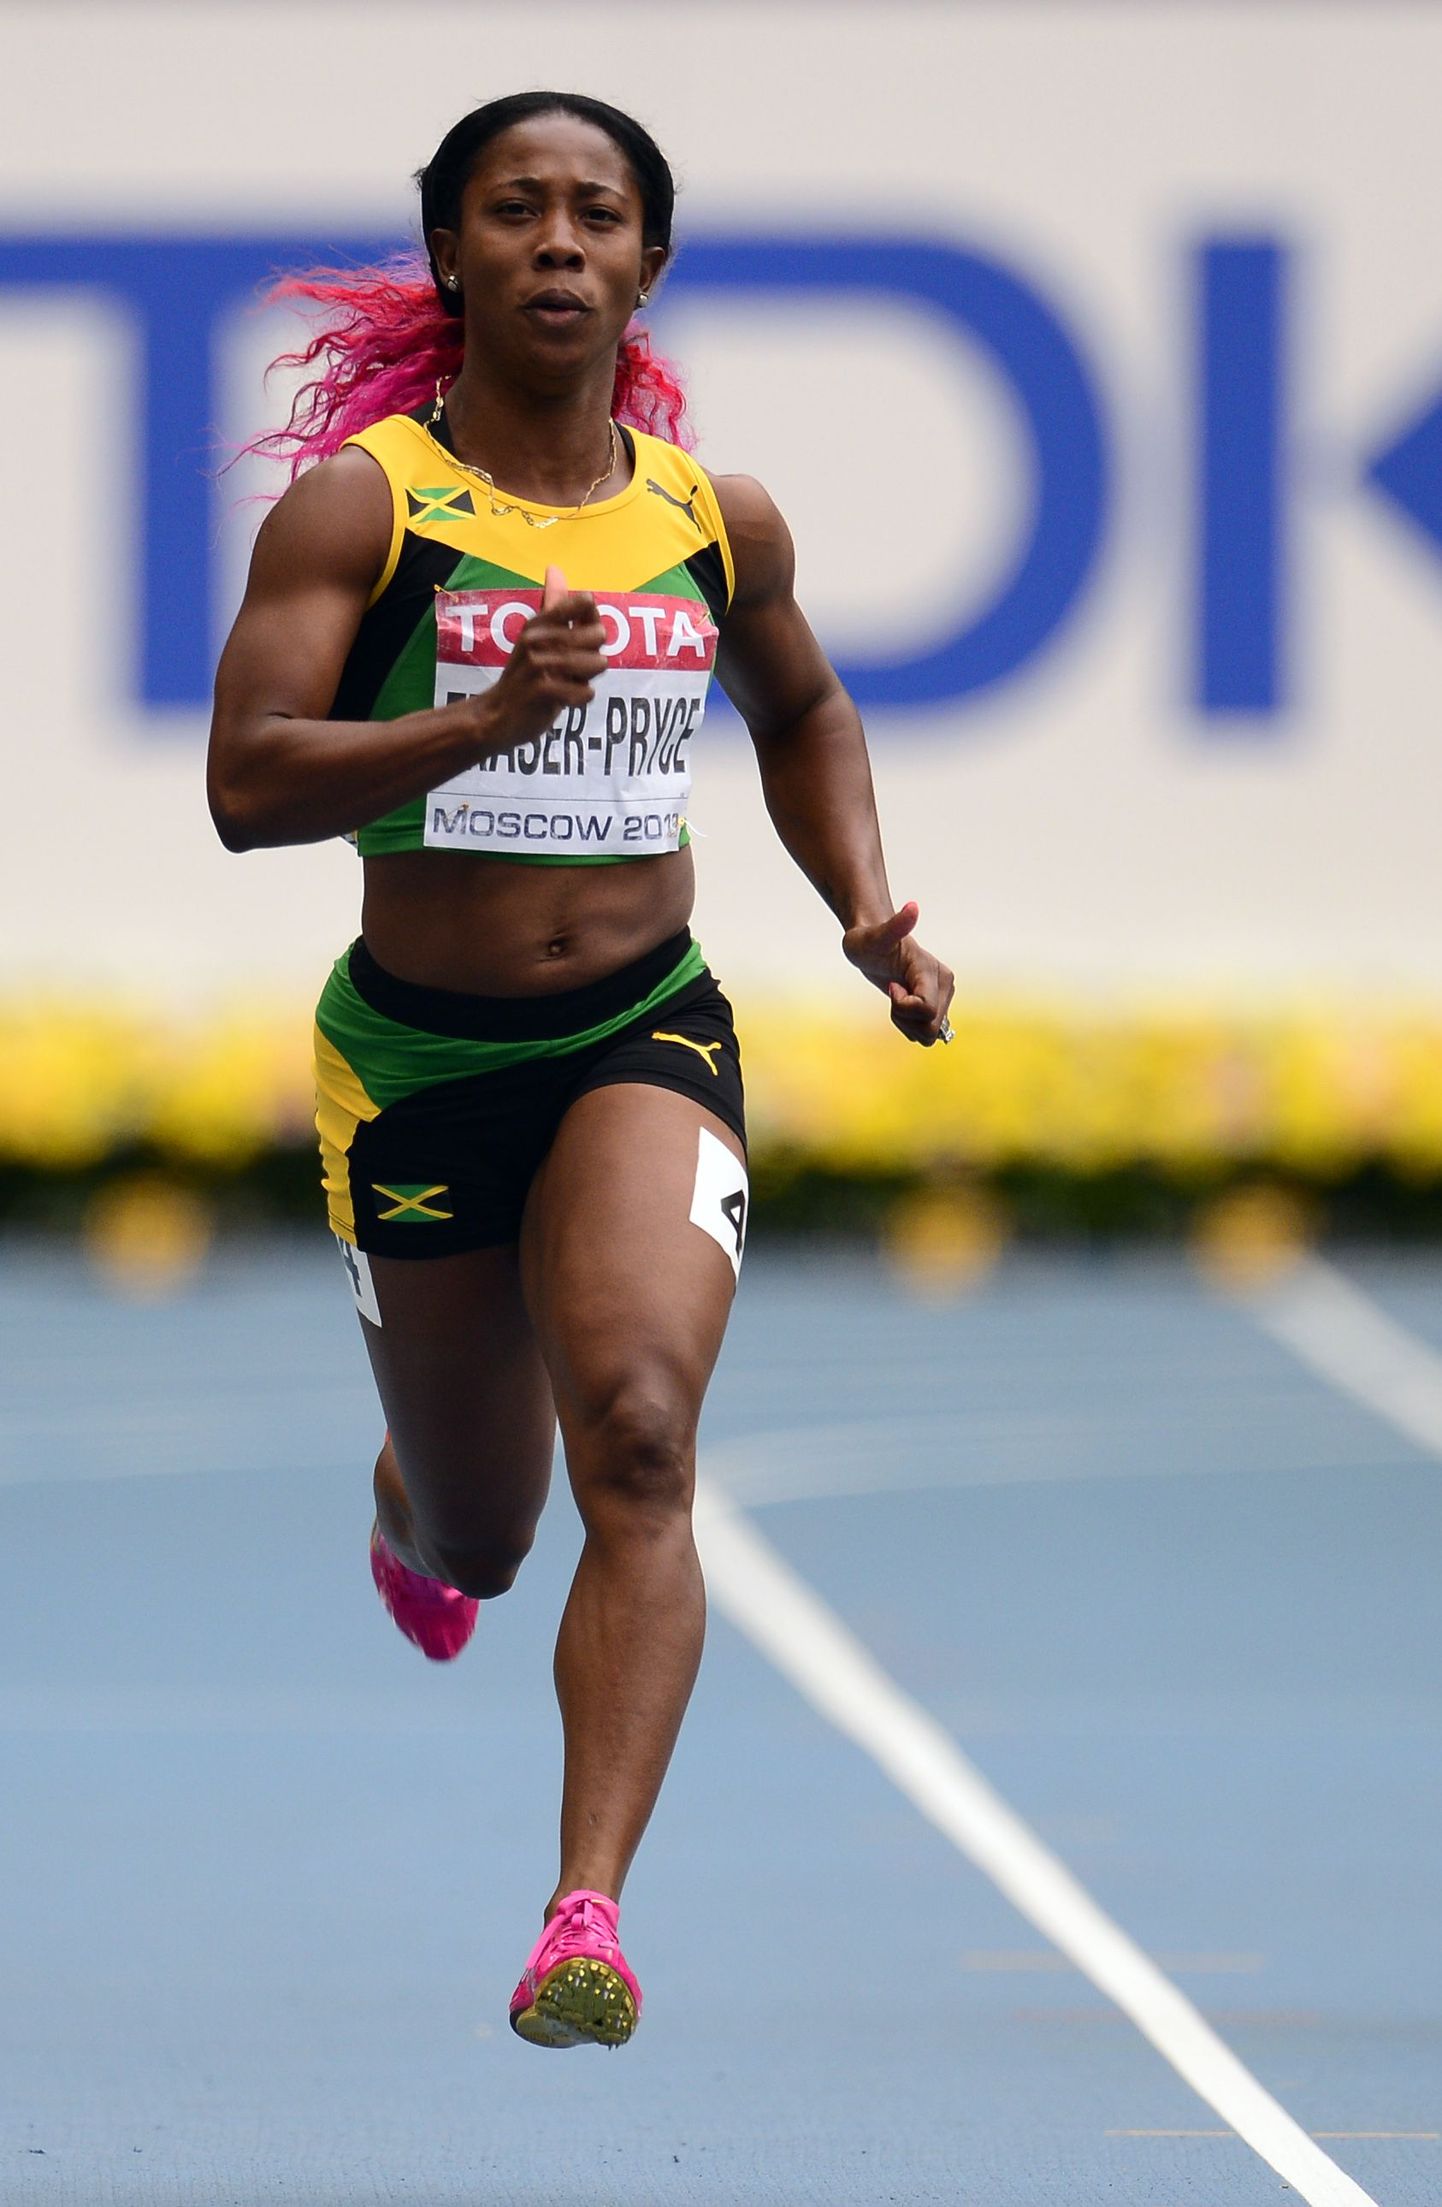 Jamaica's Shelly-Ann Fraser-Pryce (C) competes during the women's 200 metres event at the 2013 IAAF World Championships at the Luzhniki stadium in Moscow on August 15, 2013.    AFP PHOTO / OLIVIER MORIN